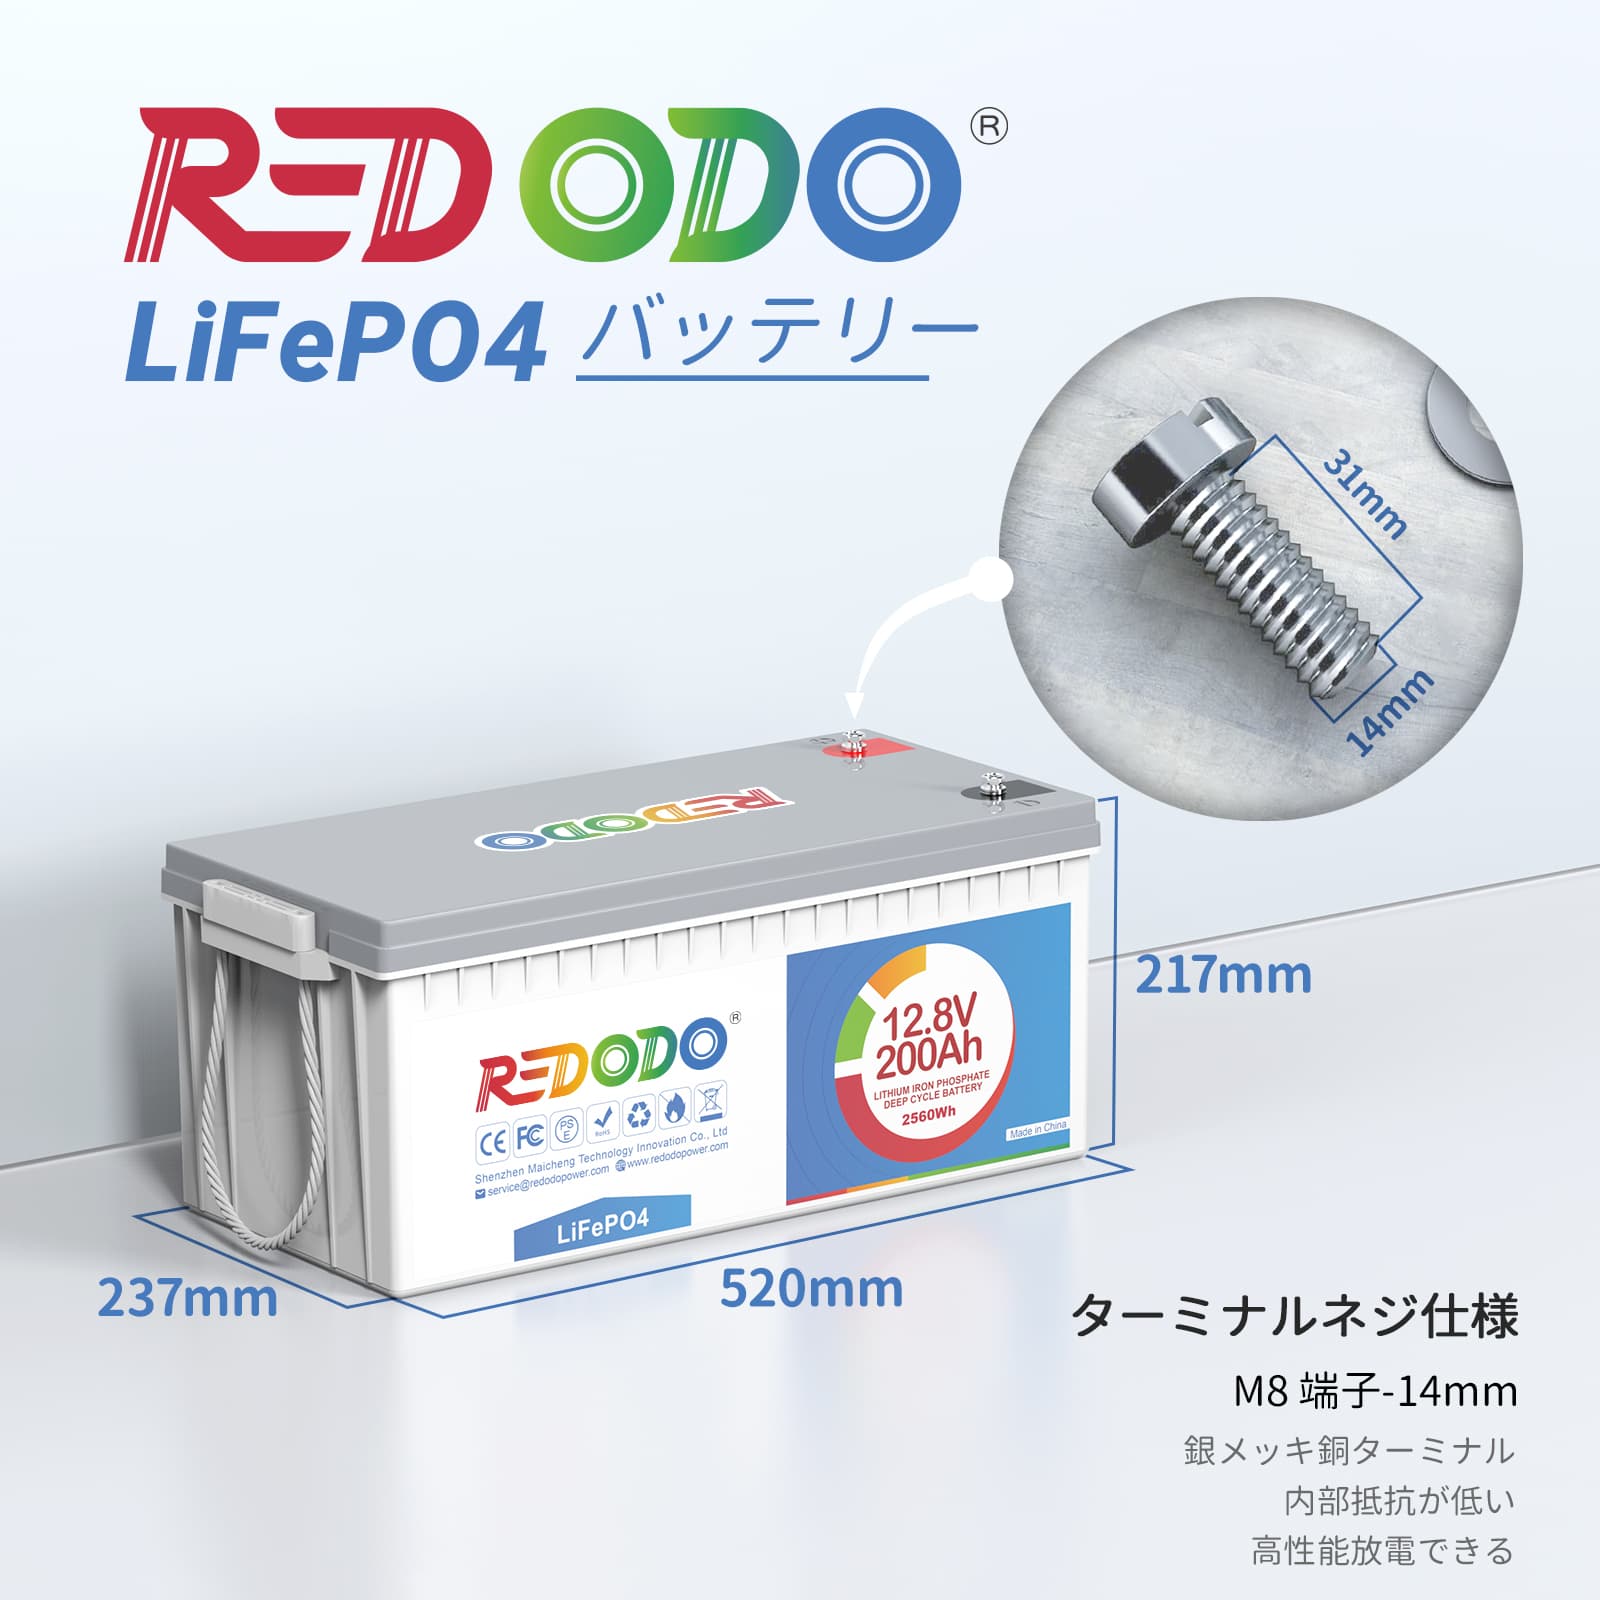 Redodo 12V 200Ah LiFePO4 Lithium Iron Phosphate Battery Built-in 100A BMS